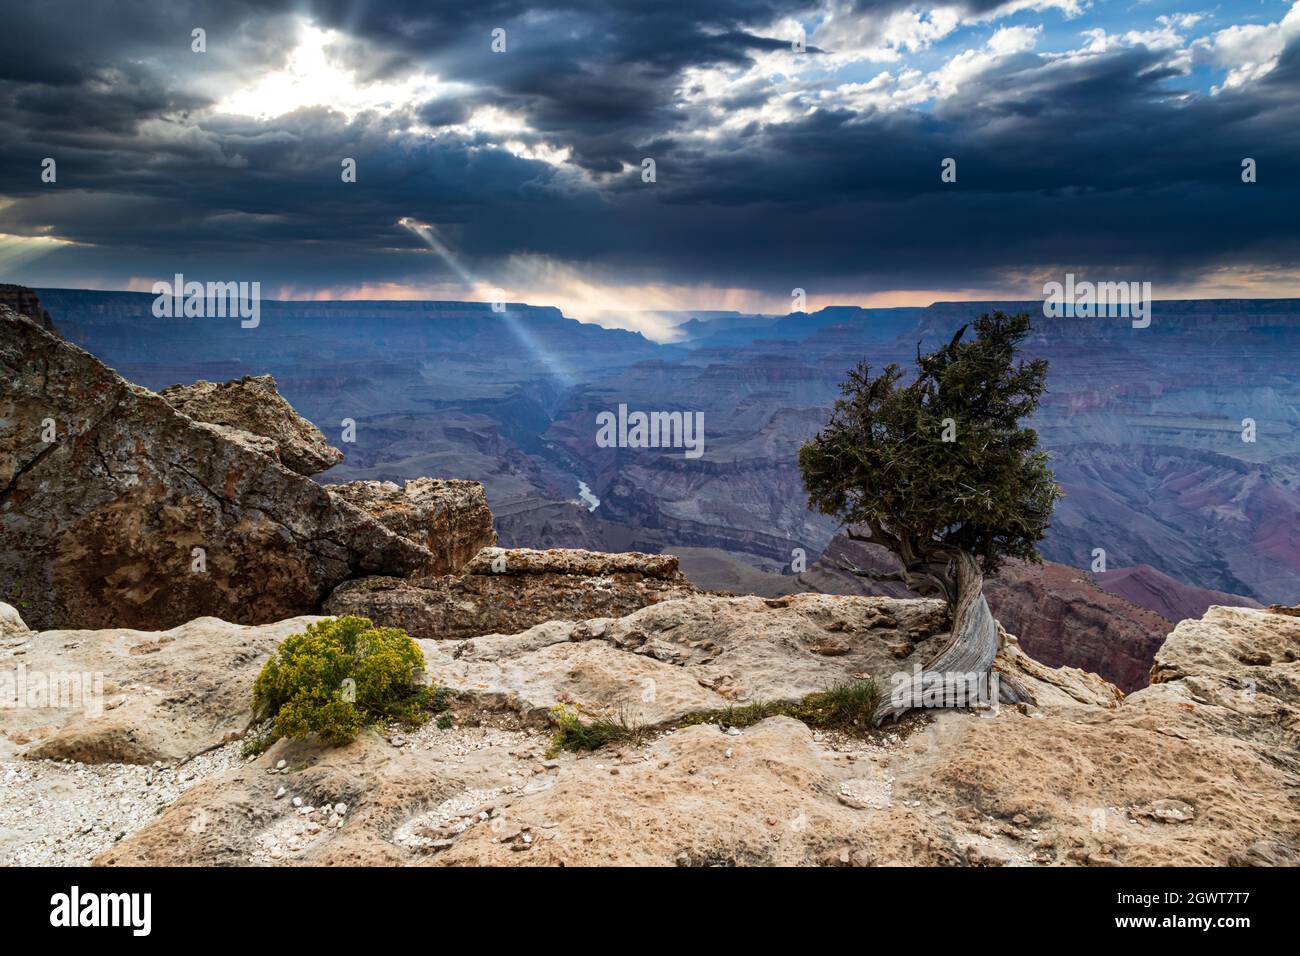 Grand Canyon, viewed from Lipan Point on the south rim. Tree in foreground; Thunderstorm raining the distance. Rays of light shining through clouds. Stock Photo